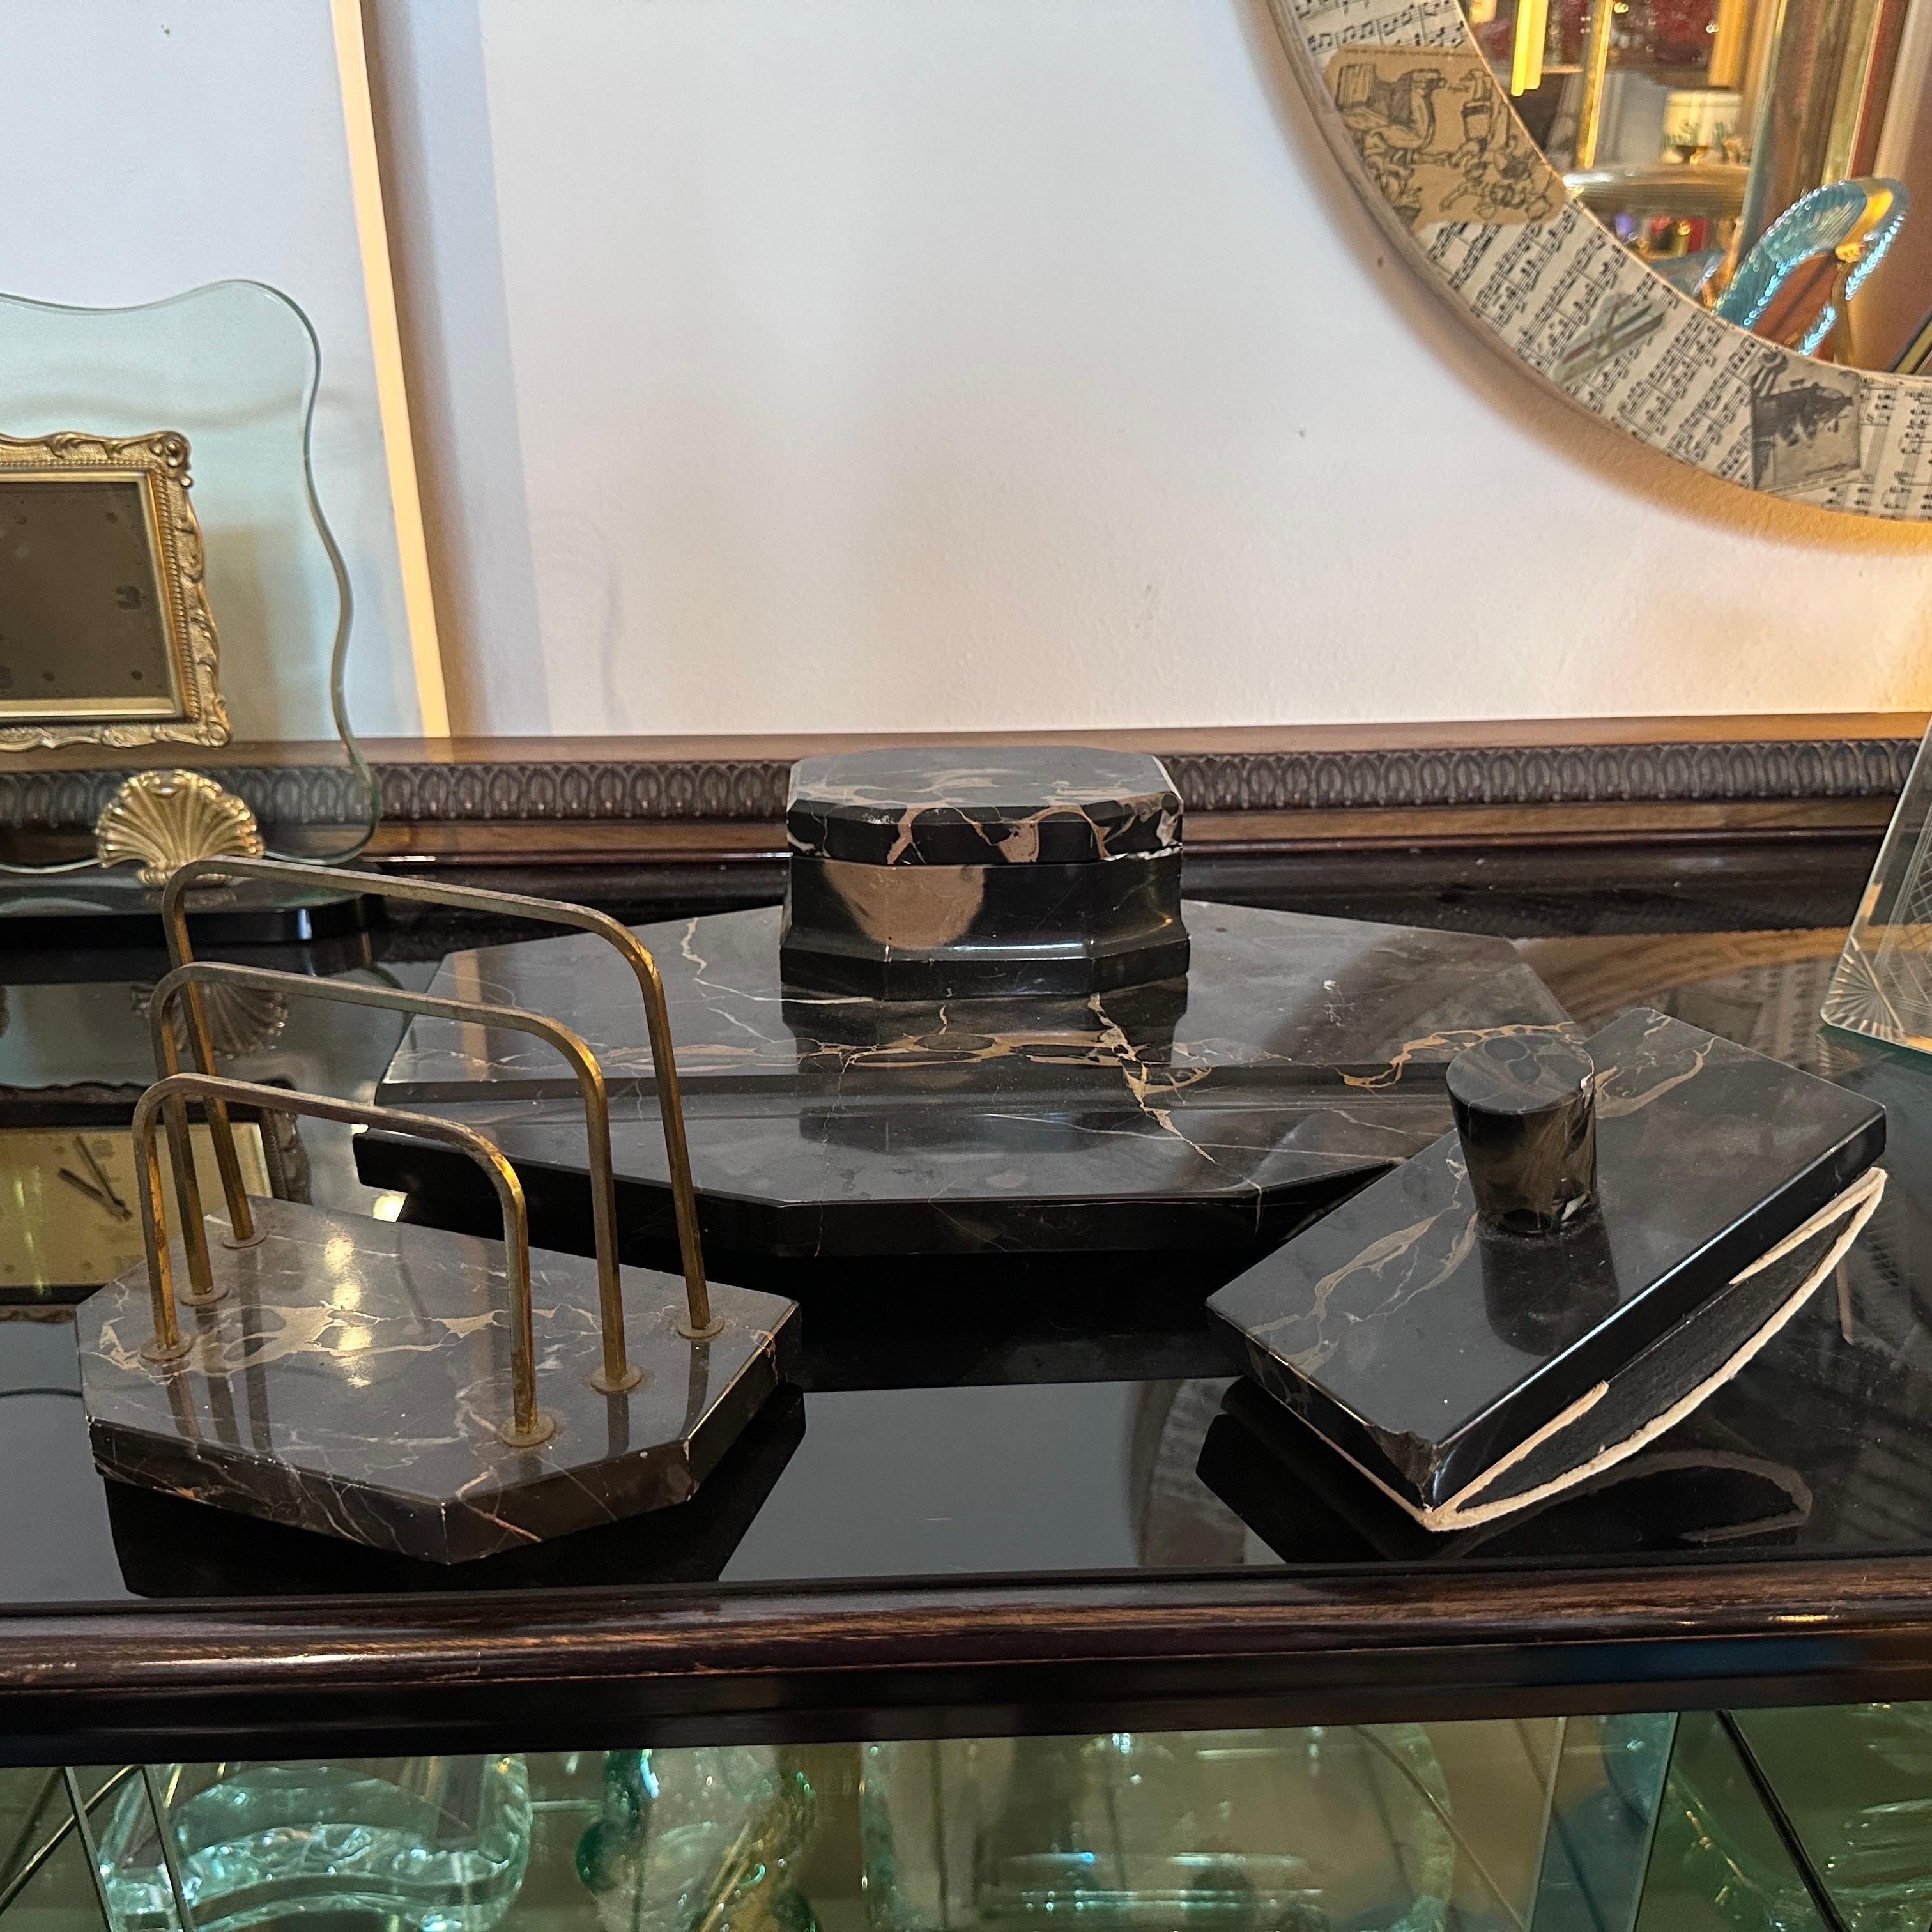 An art deco desk set manufactured in Italy in the Thirties, in original conditions with small signs of use and age, brass it's in original patina. Dimensions are of the Inkstand. This Desk Set is an exquisite embodiment of the opulent and geometric